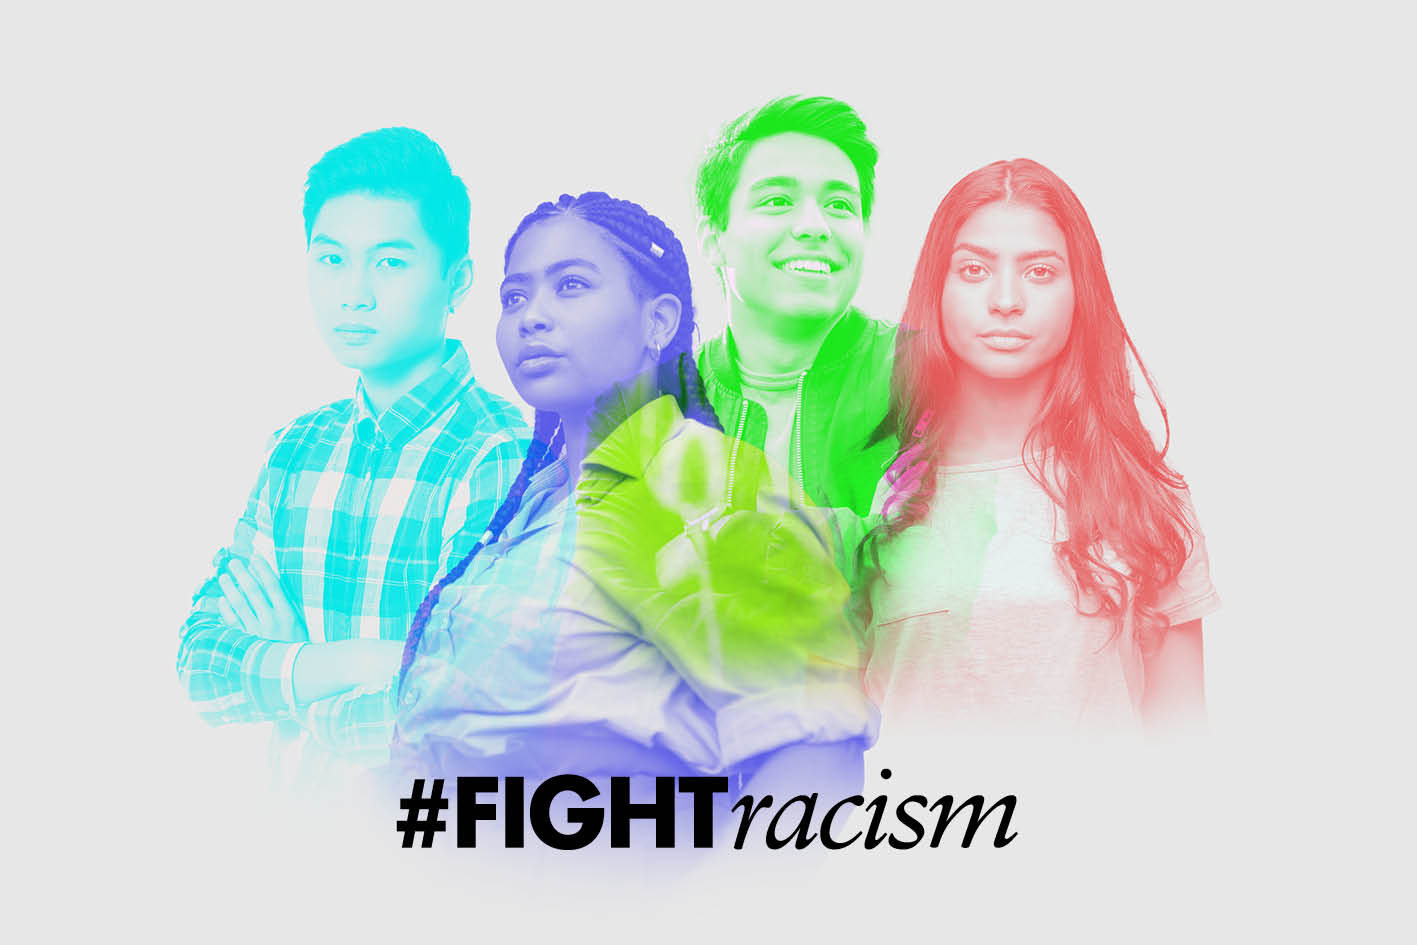 Youth are standing up against racism